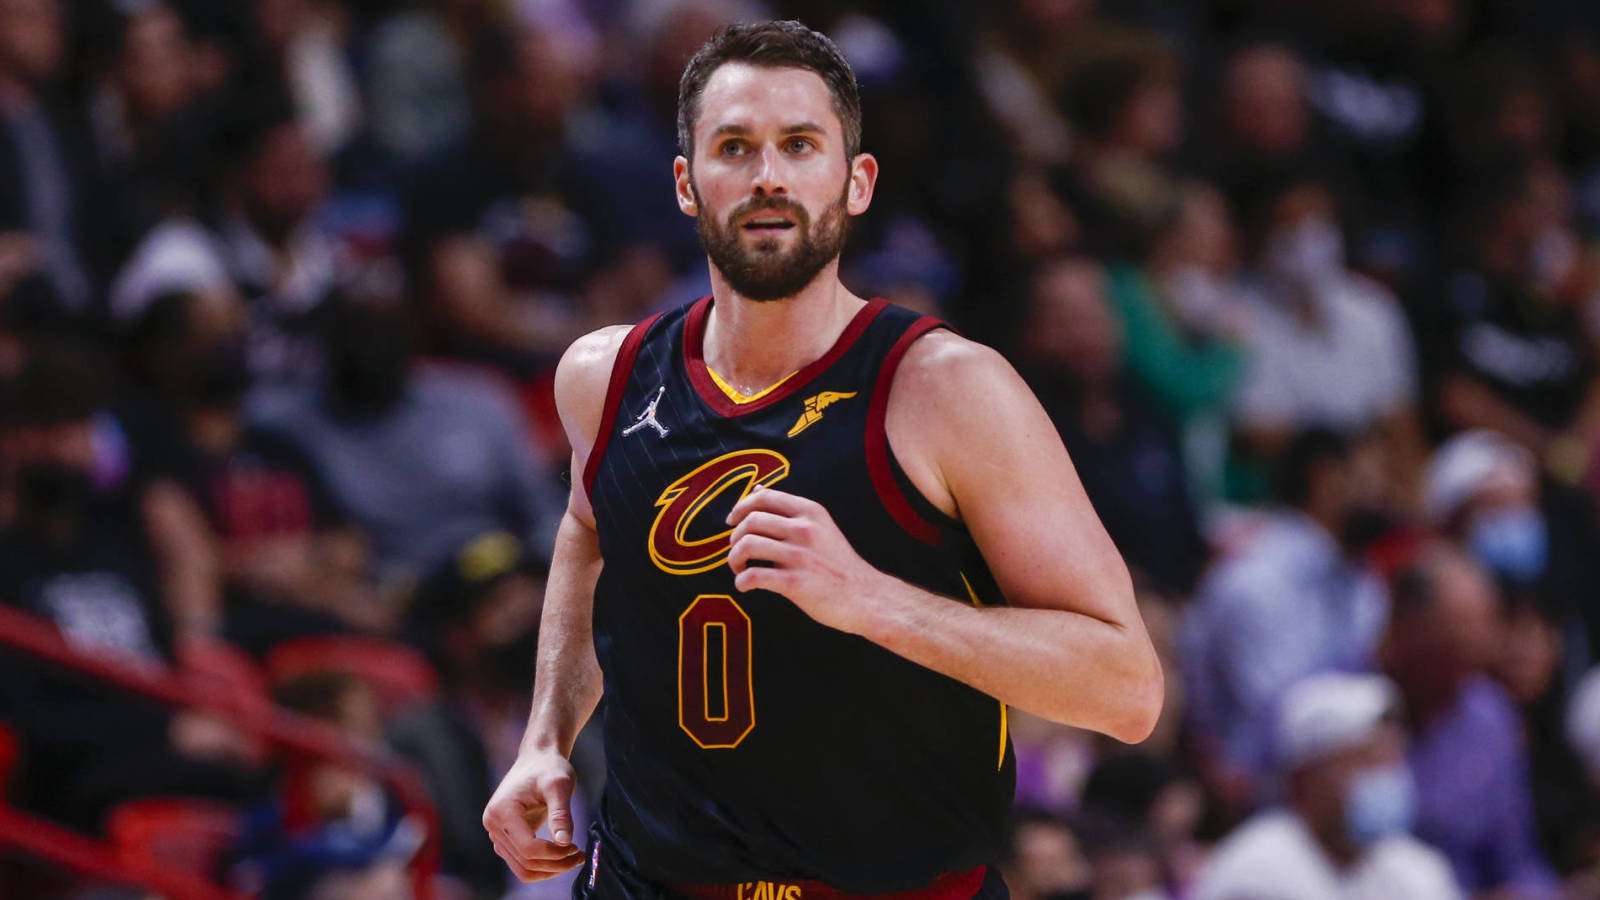 Ruderman Family Foundation honors Kevin Love for mental health advocacy